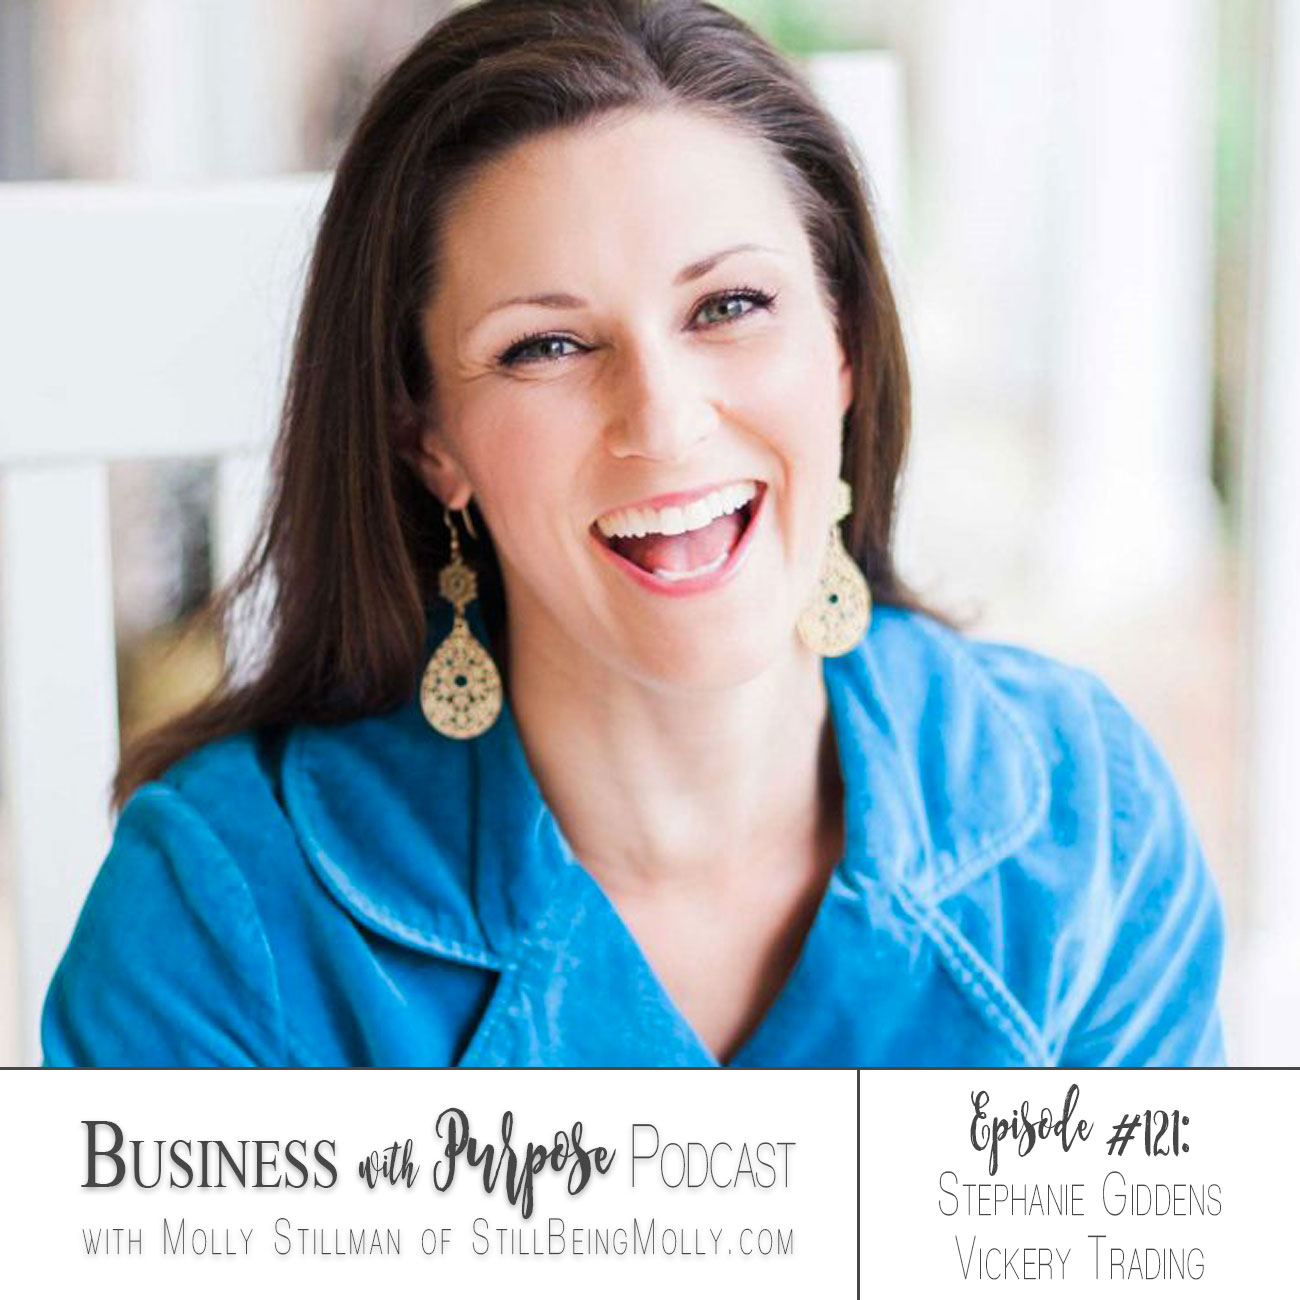 Business with Purpose Podcast EP 121: Stephanie Giddens, Vickery Trading